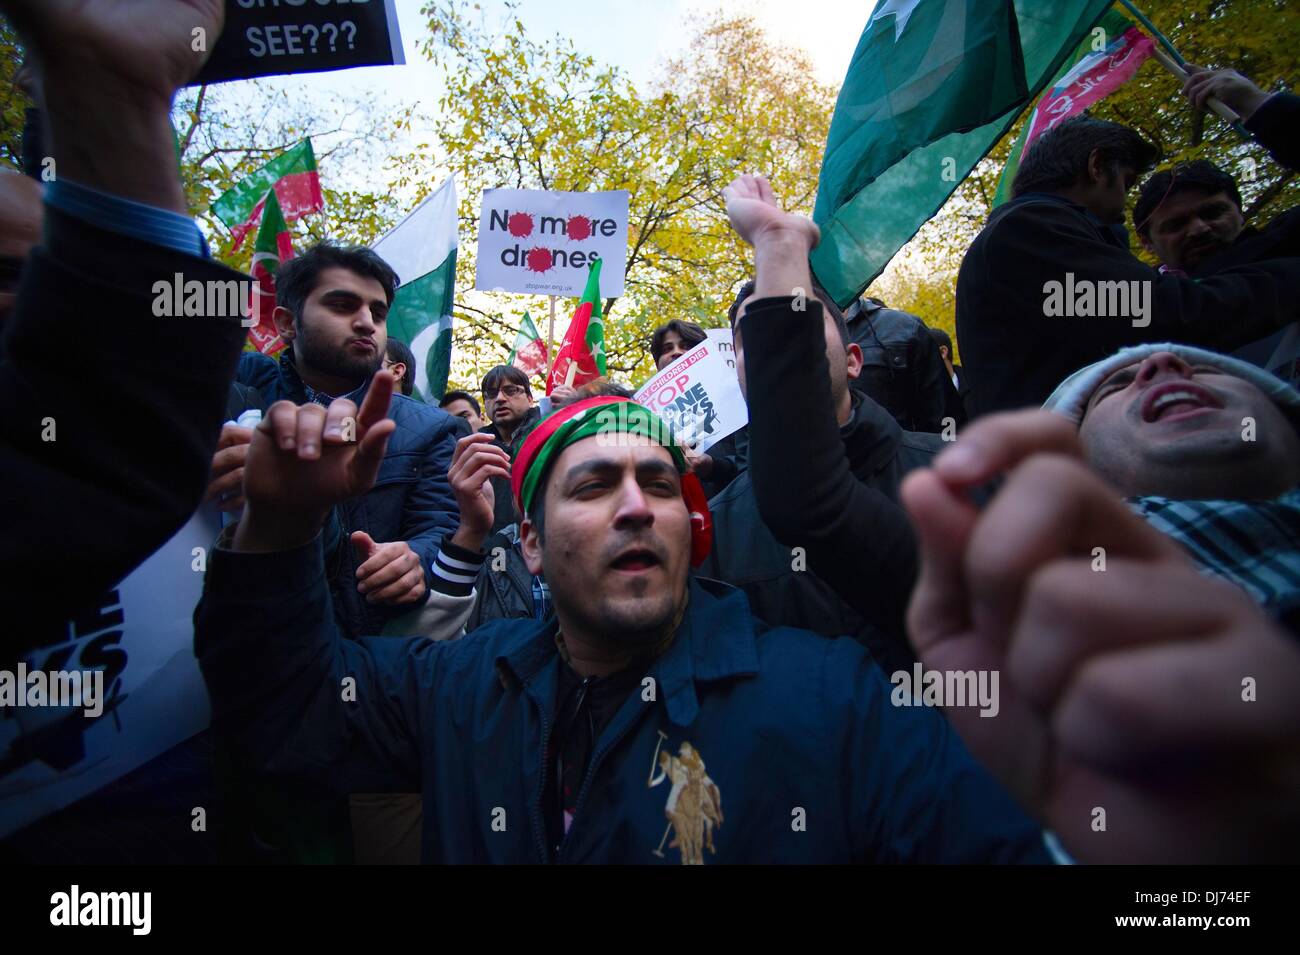 London, UK, UK. 23rd Nov, 2013. Members and supporters of Pakistan Tehreek-e-Insaf marched from 10 Downing street to the US embassy in London demanding an end to the use of US drone strikes in Pakistan. Credit:  Gail Orenstein/ZUMAPRESS.com/Alamy Live News Stock Photo